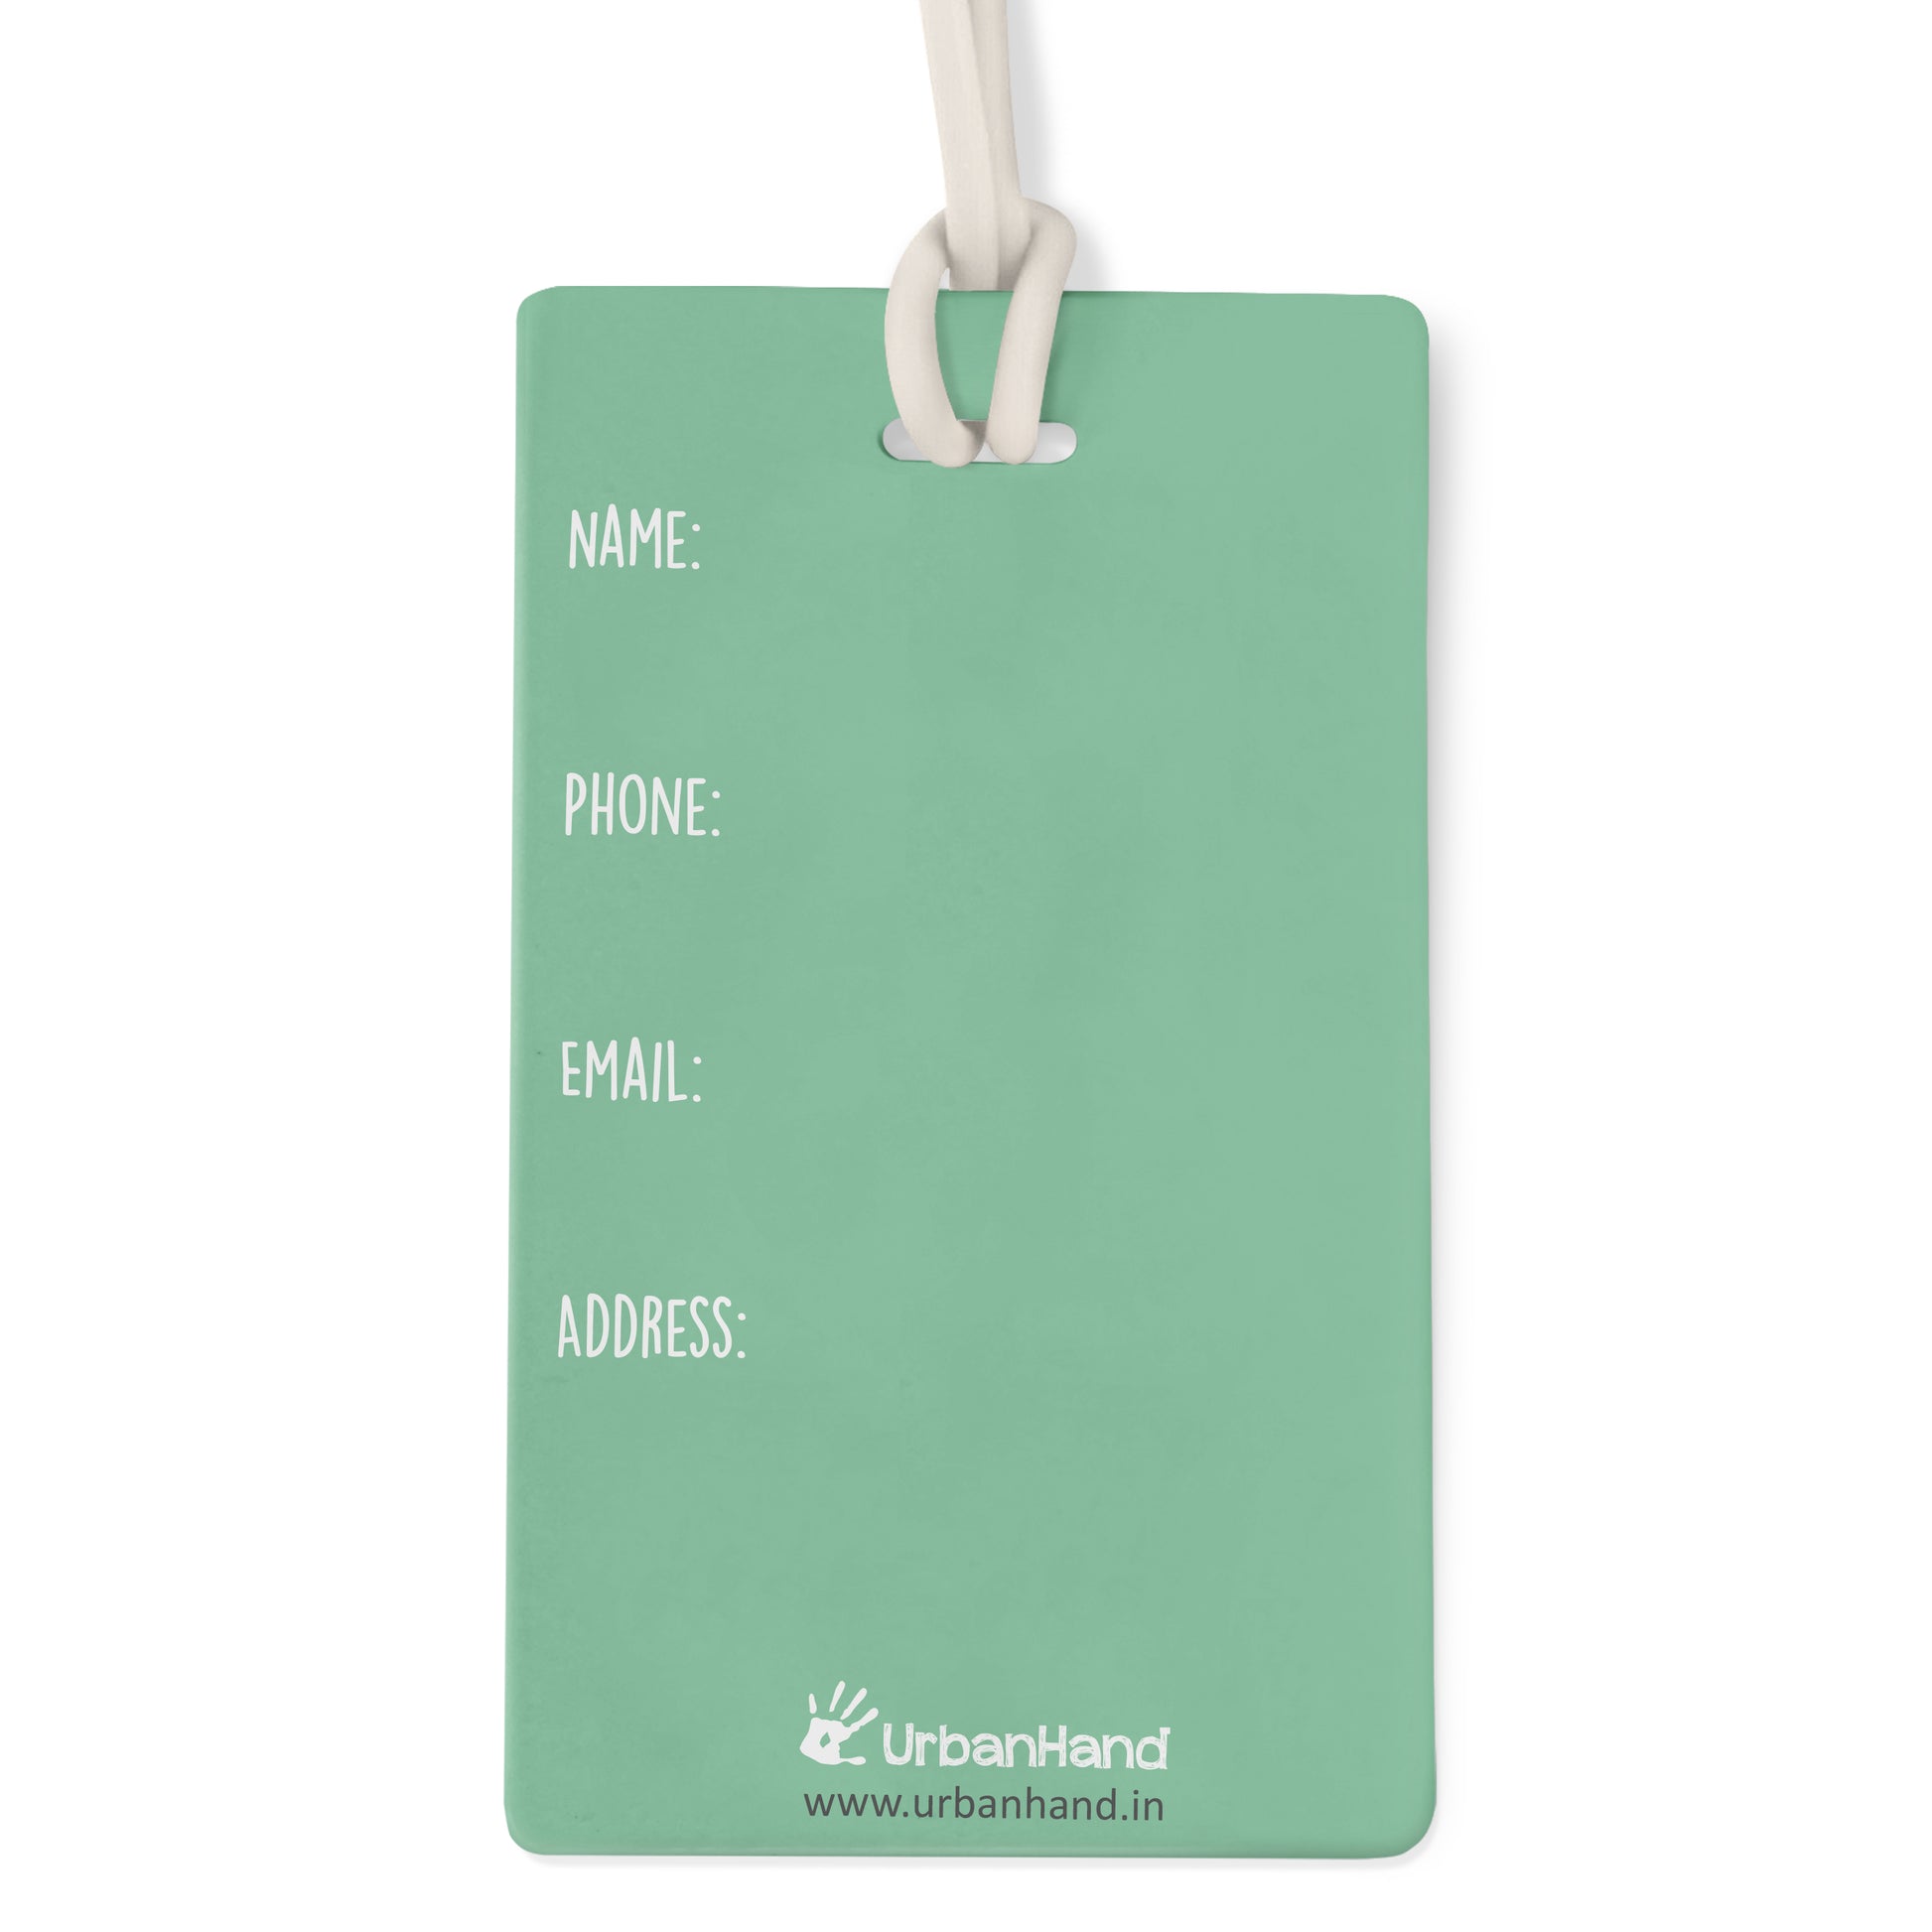 Urbanhand urban hand Emotional Baggage Bag tag luggage Personalised Cute quirky travel accessories